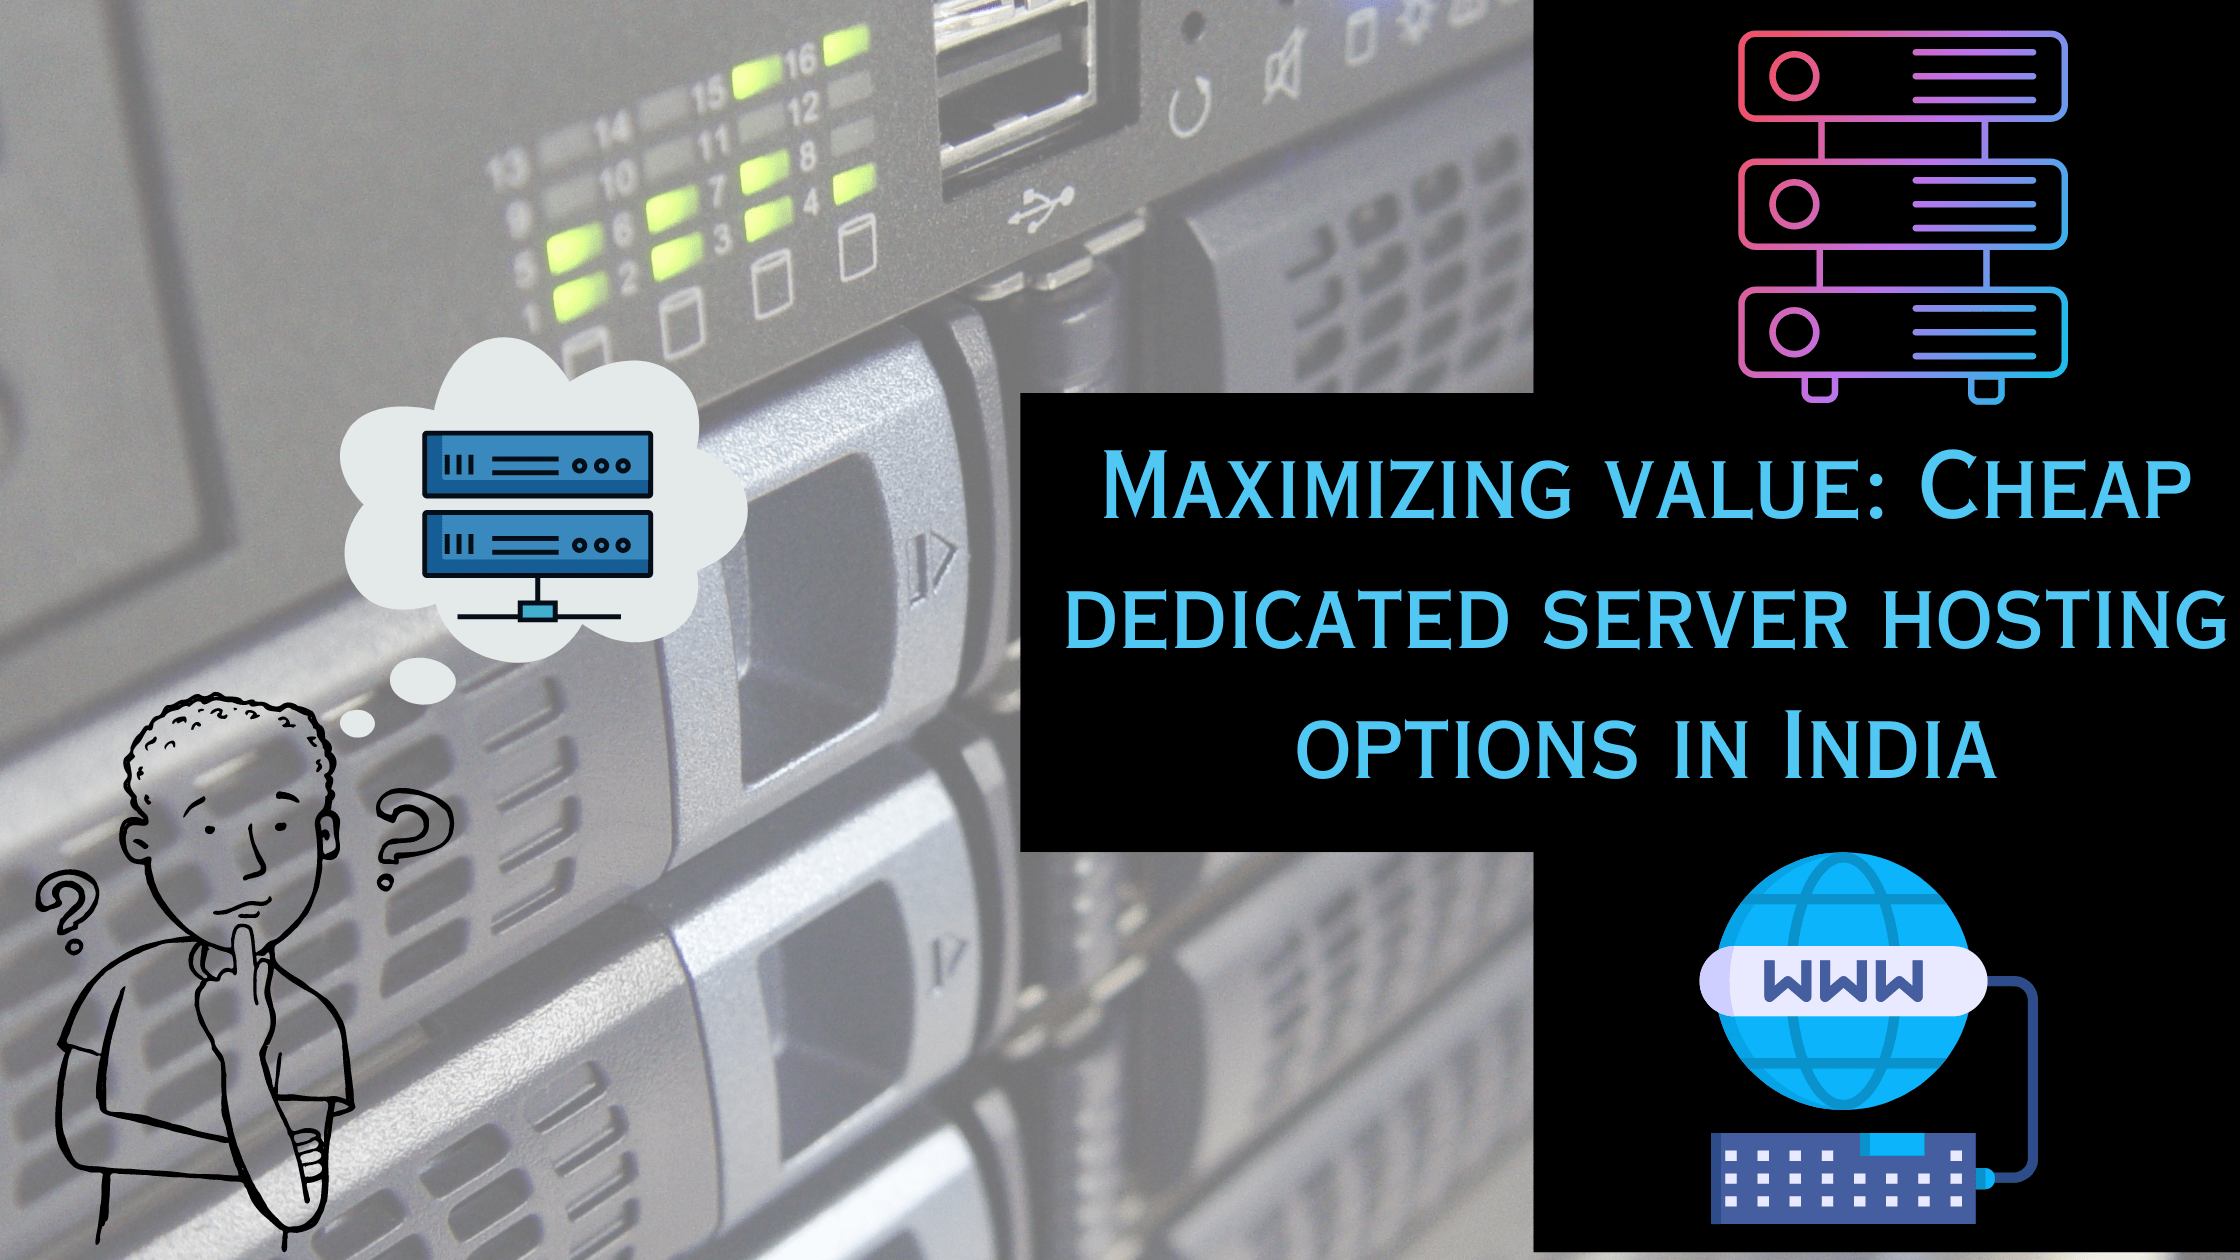 Maximizing value: Cheap dedicated server hosting options in India